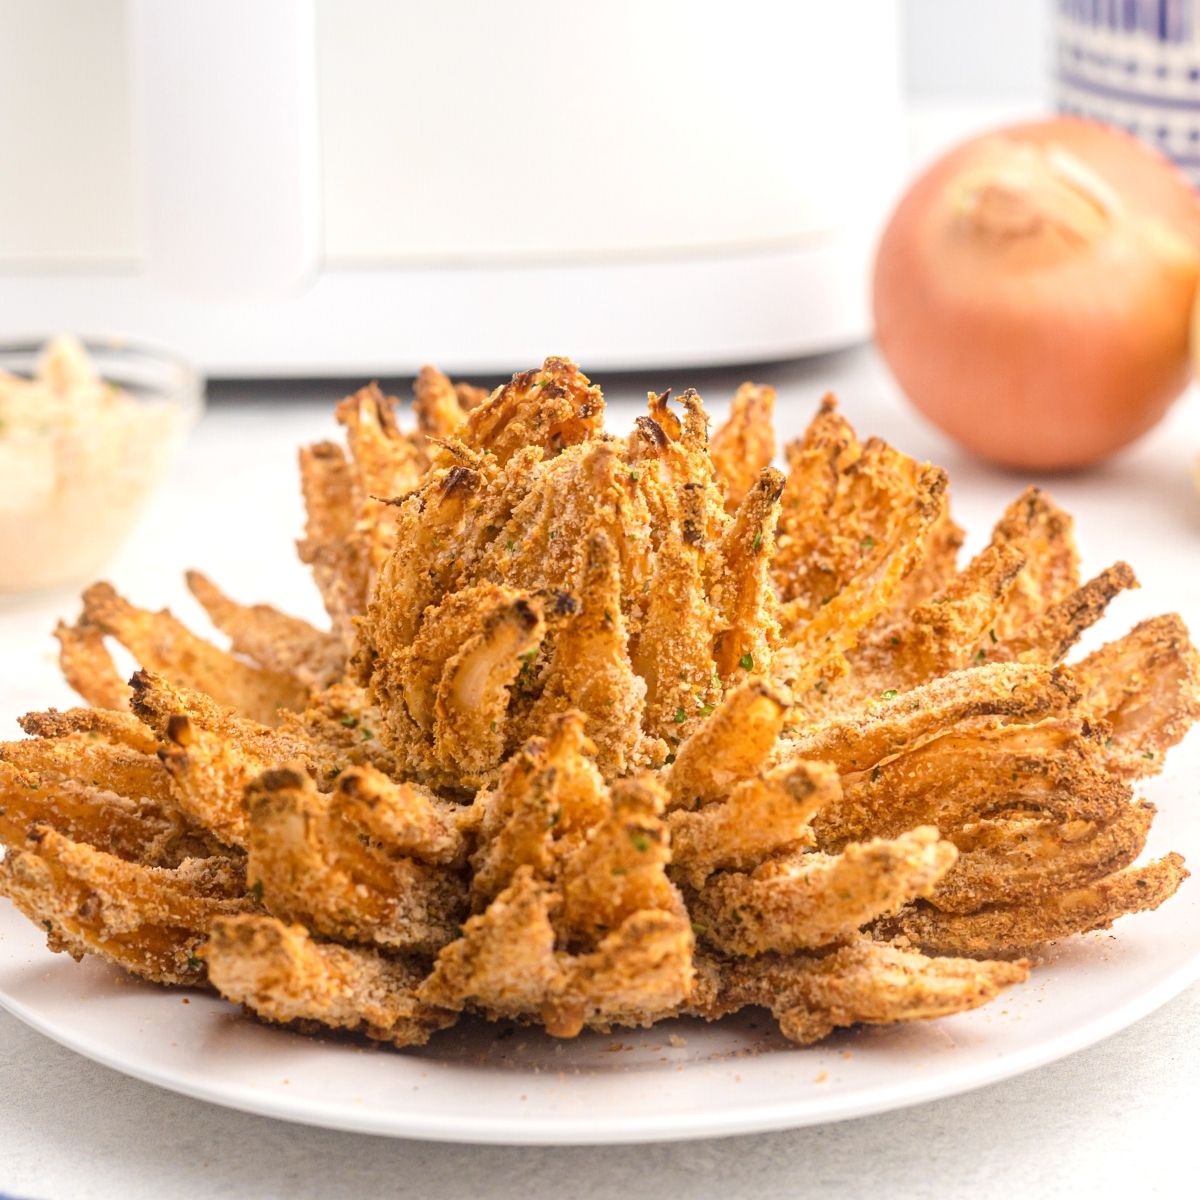 Golden crispy sliced onion with air fryer in background